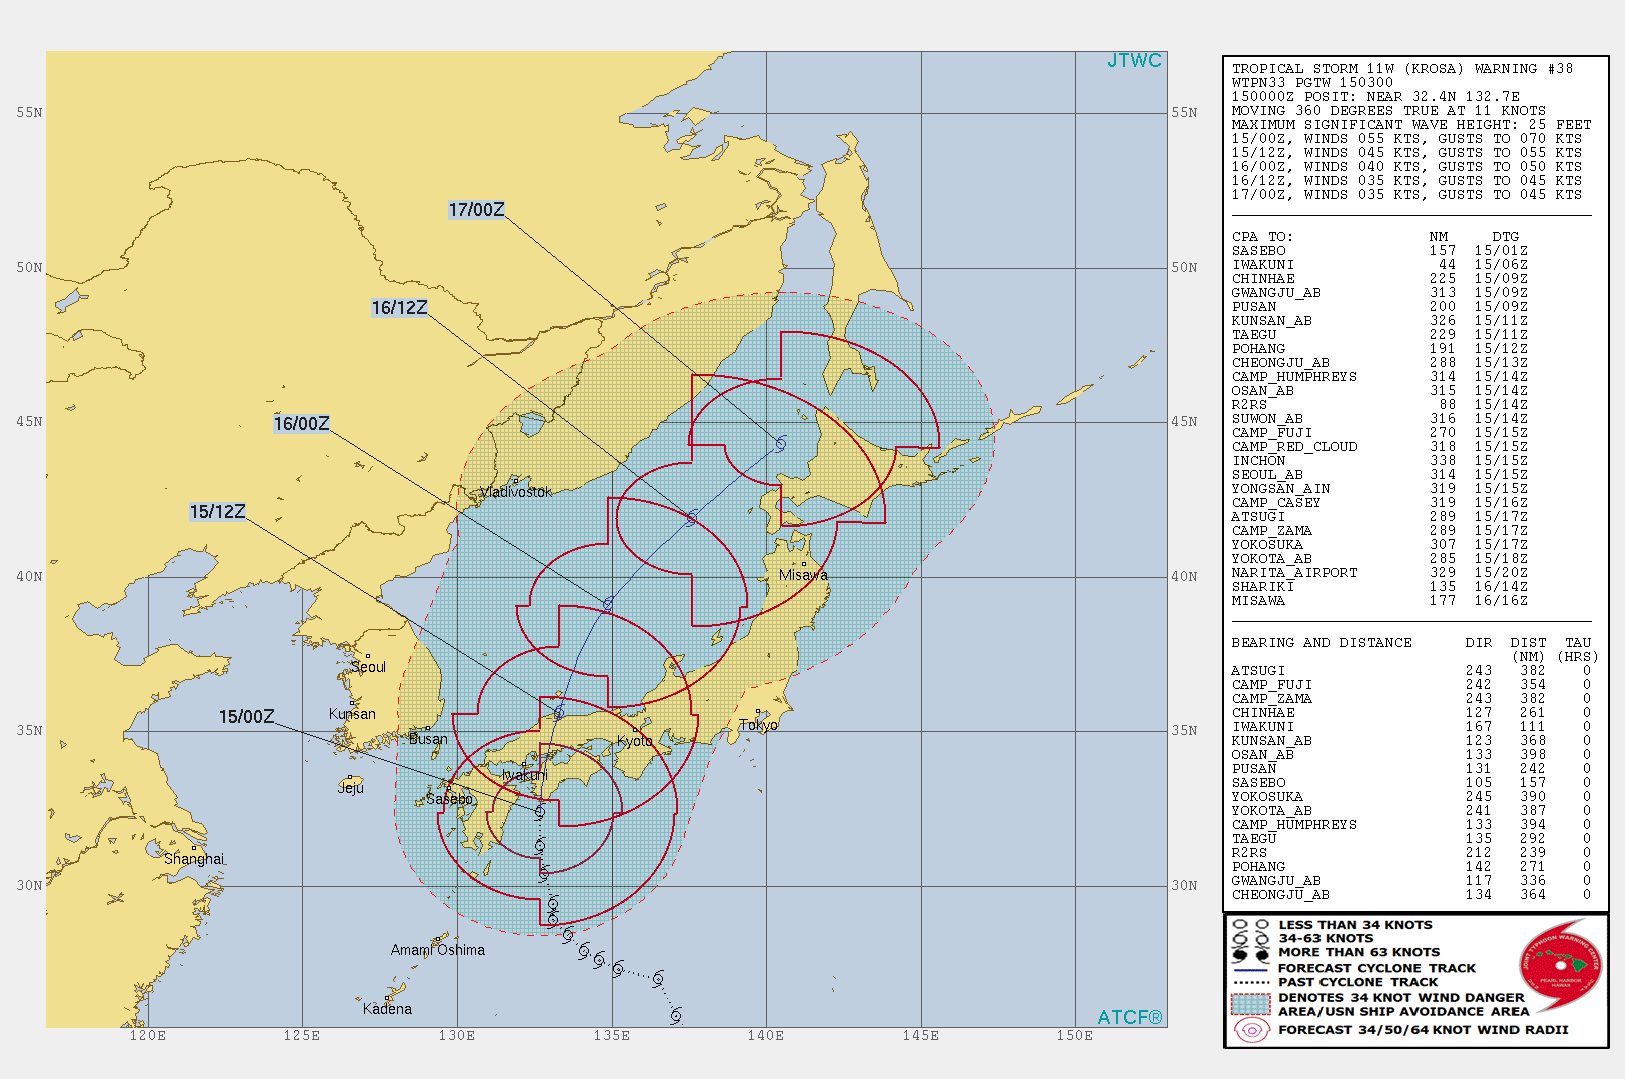 TS Krosa is forecast to begin extratropical transition in 24h over the Sea of Japan